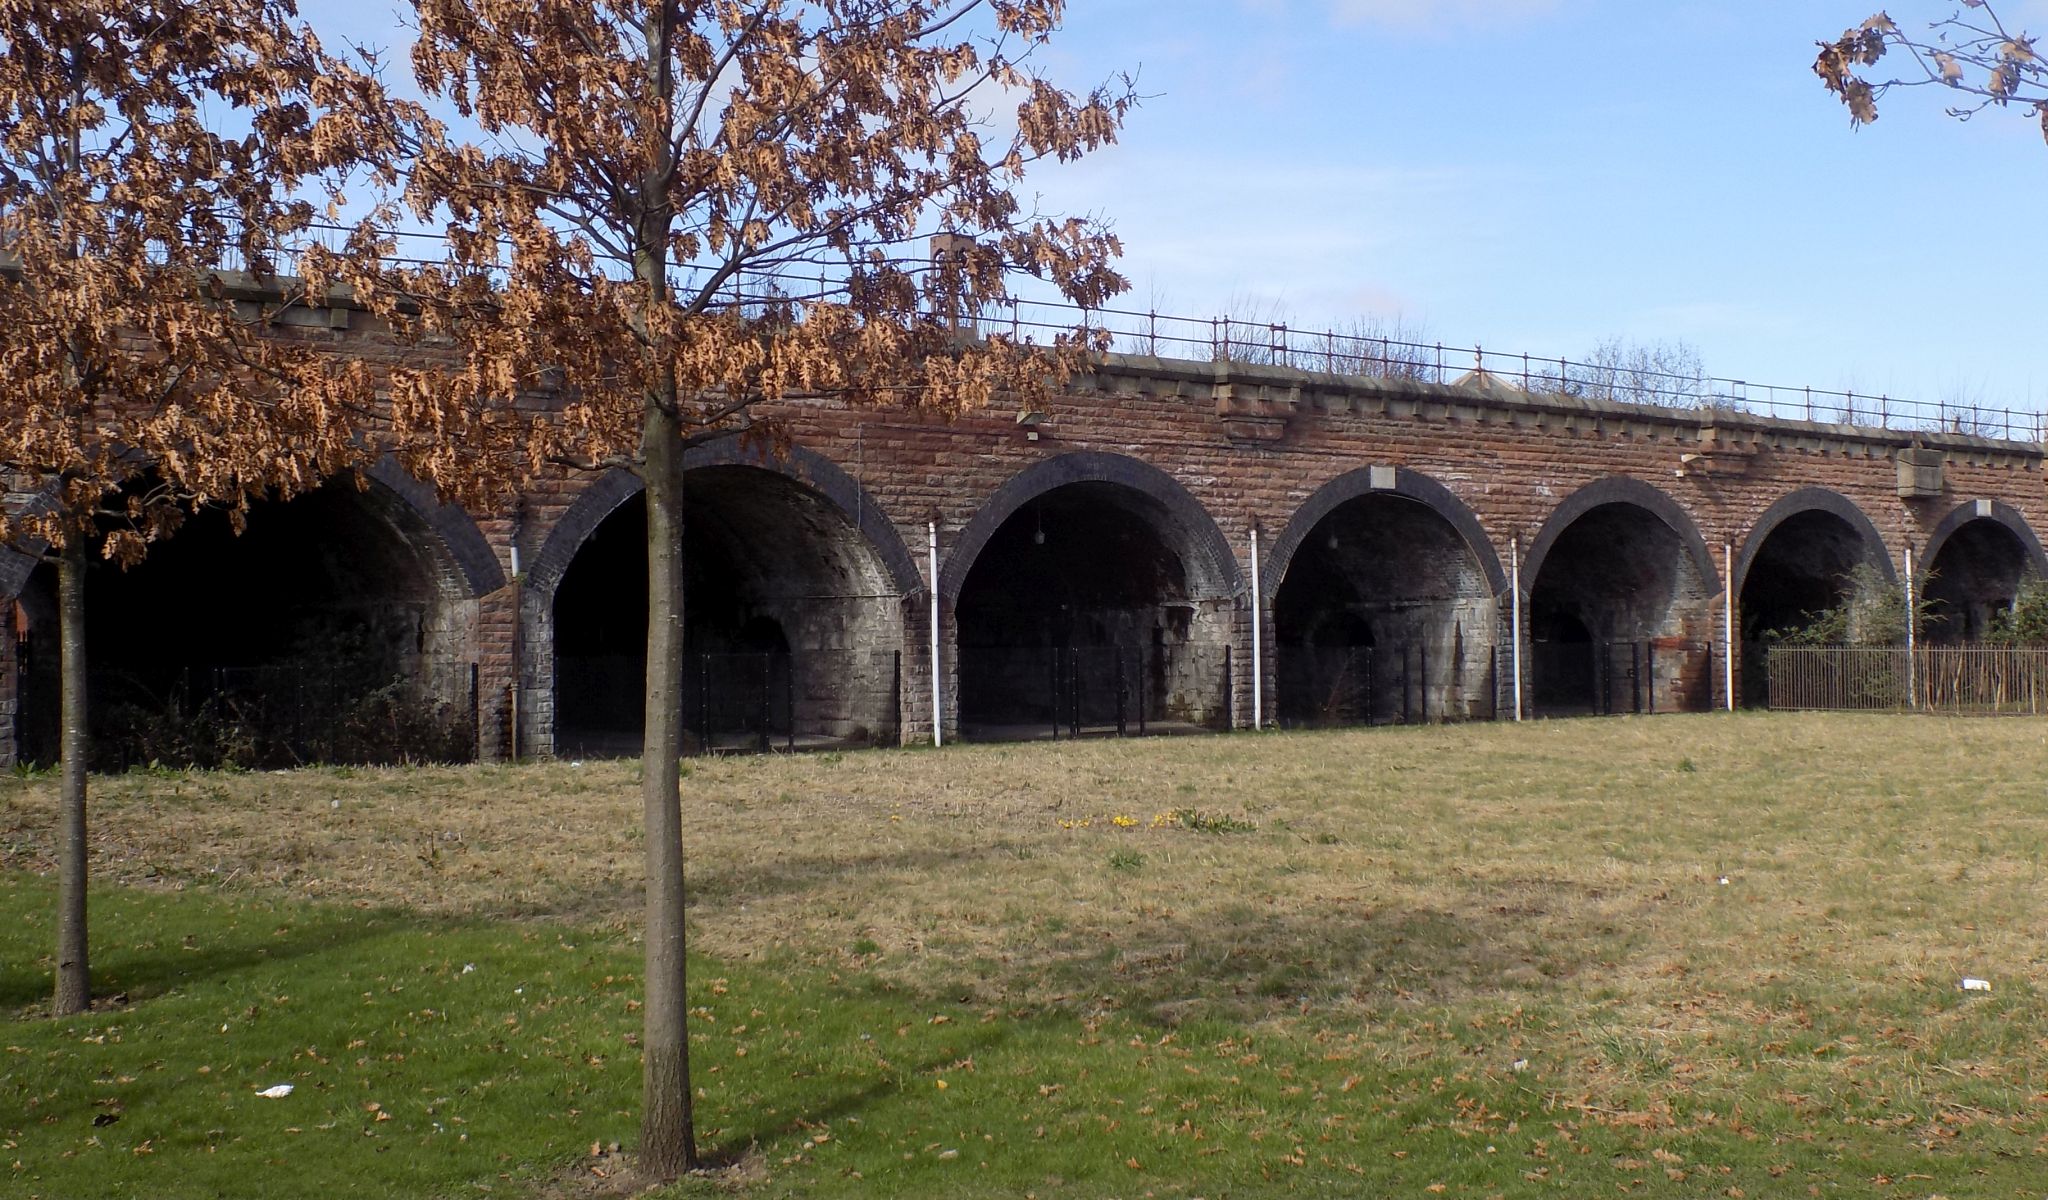 Railway Arches in the Gorbals District